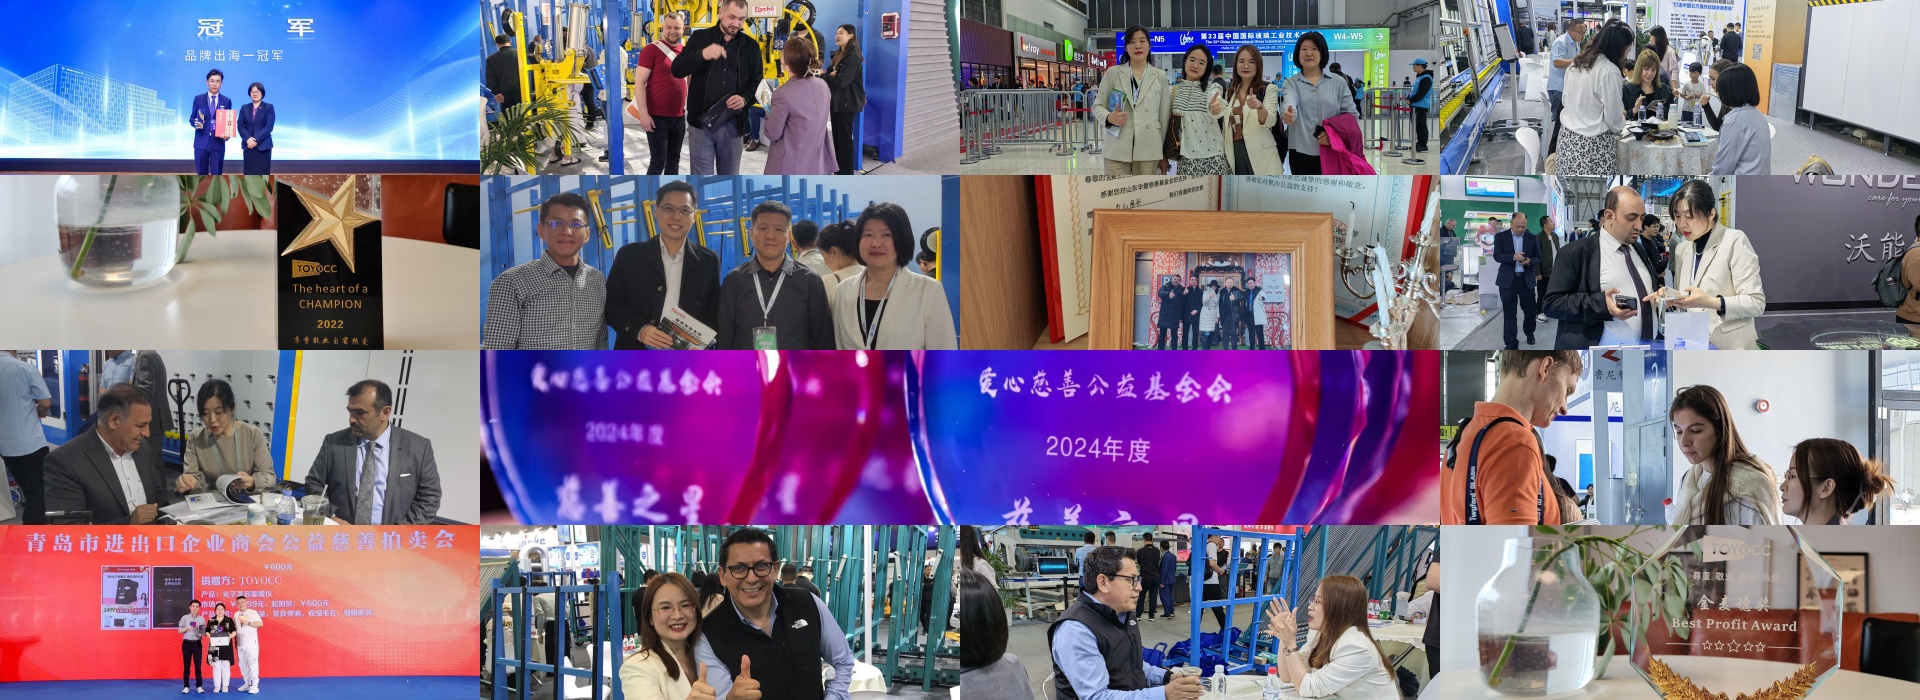 About us Exhibition